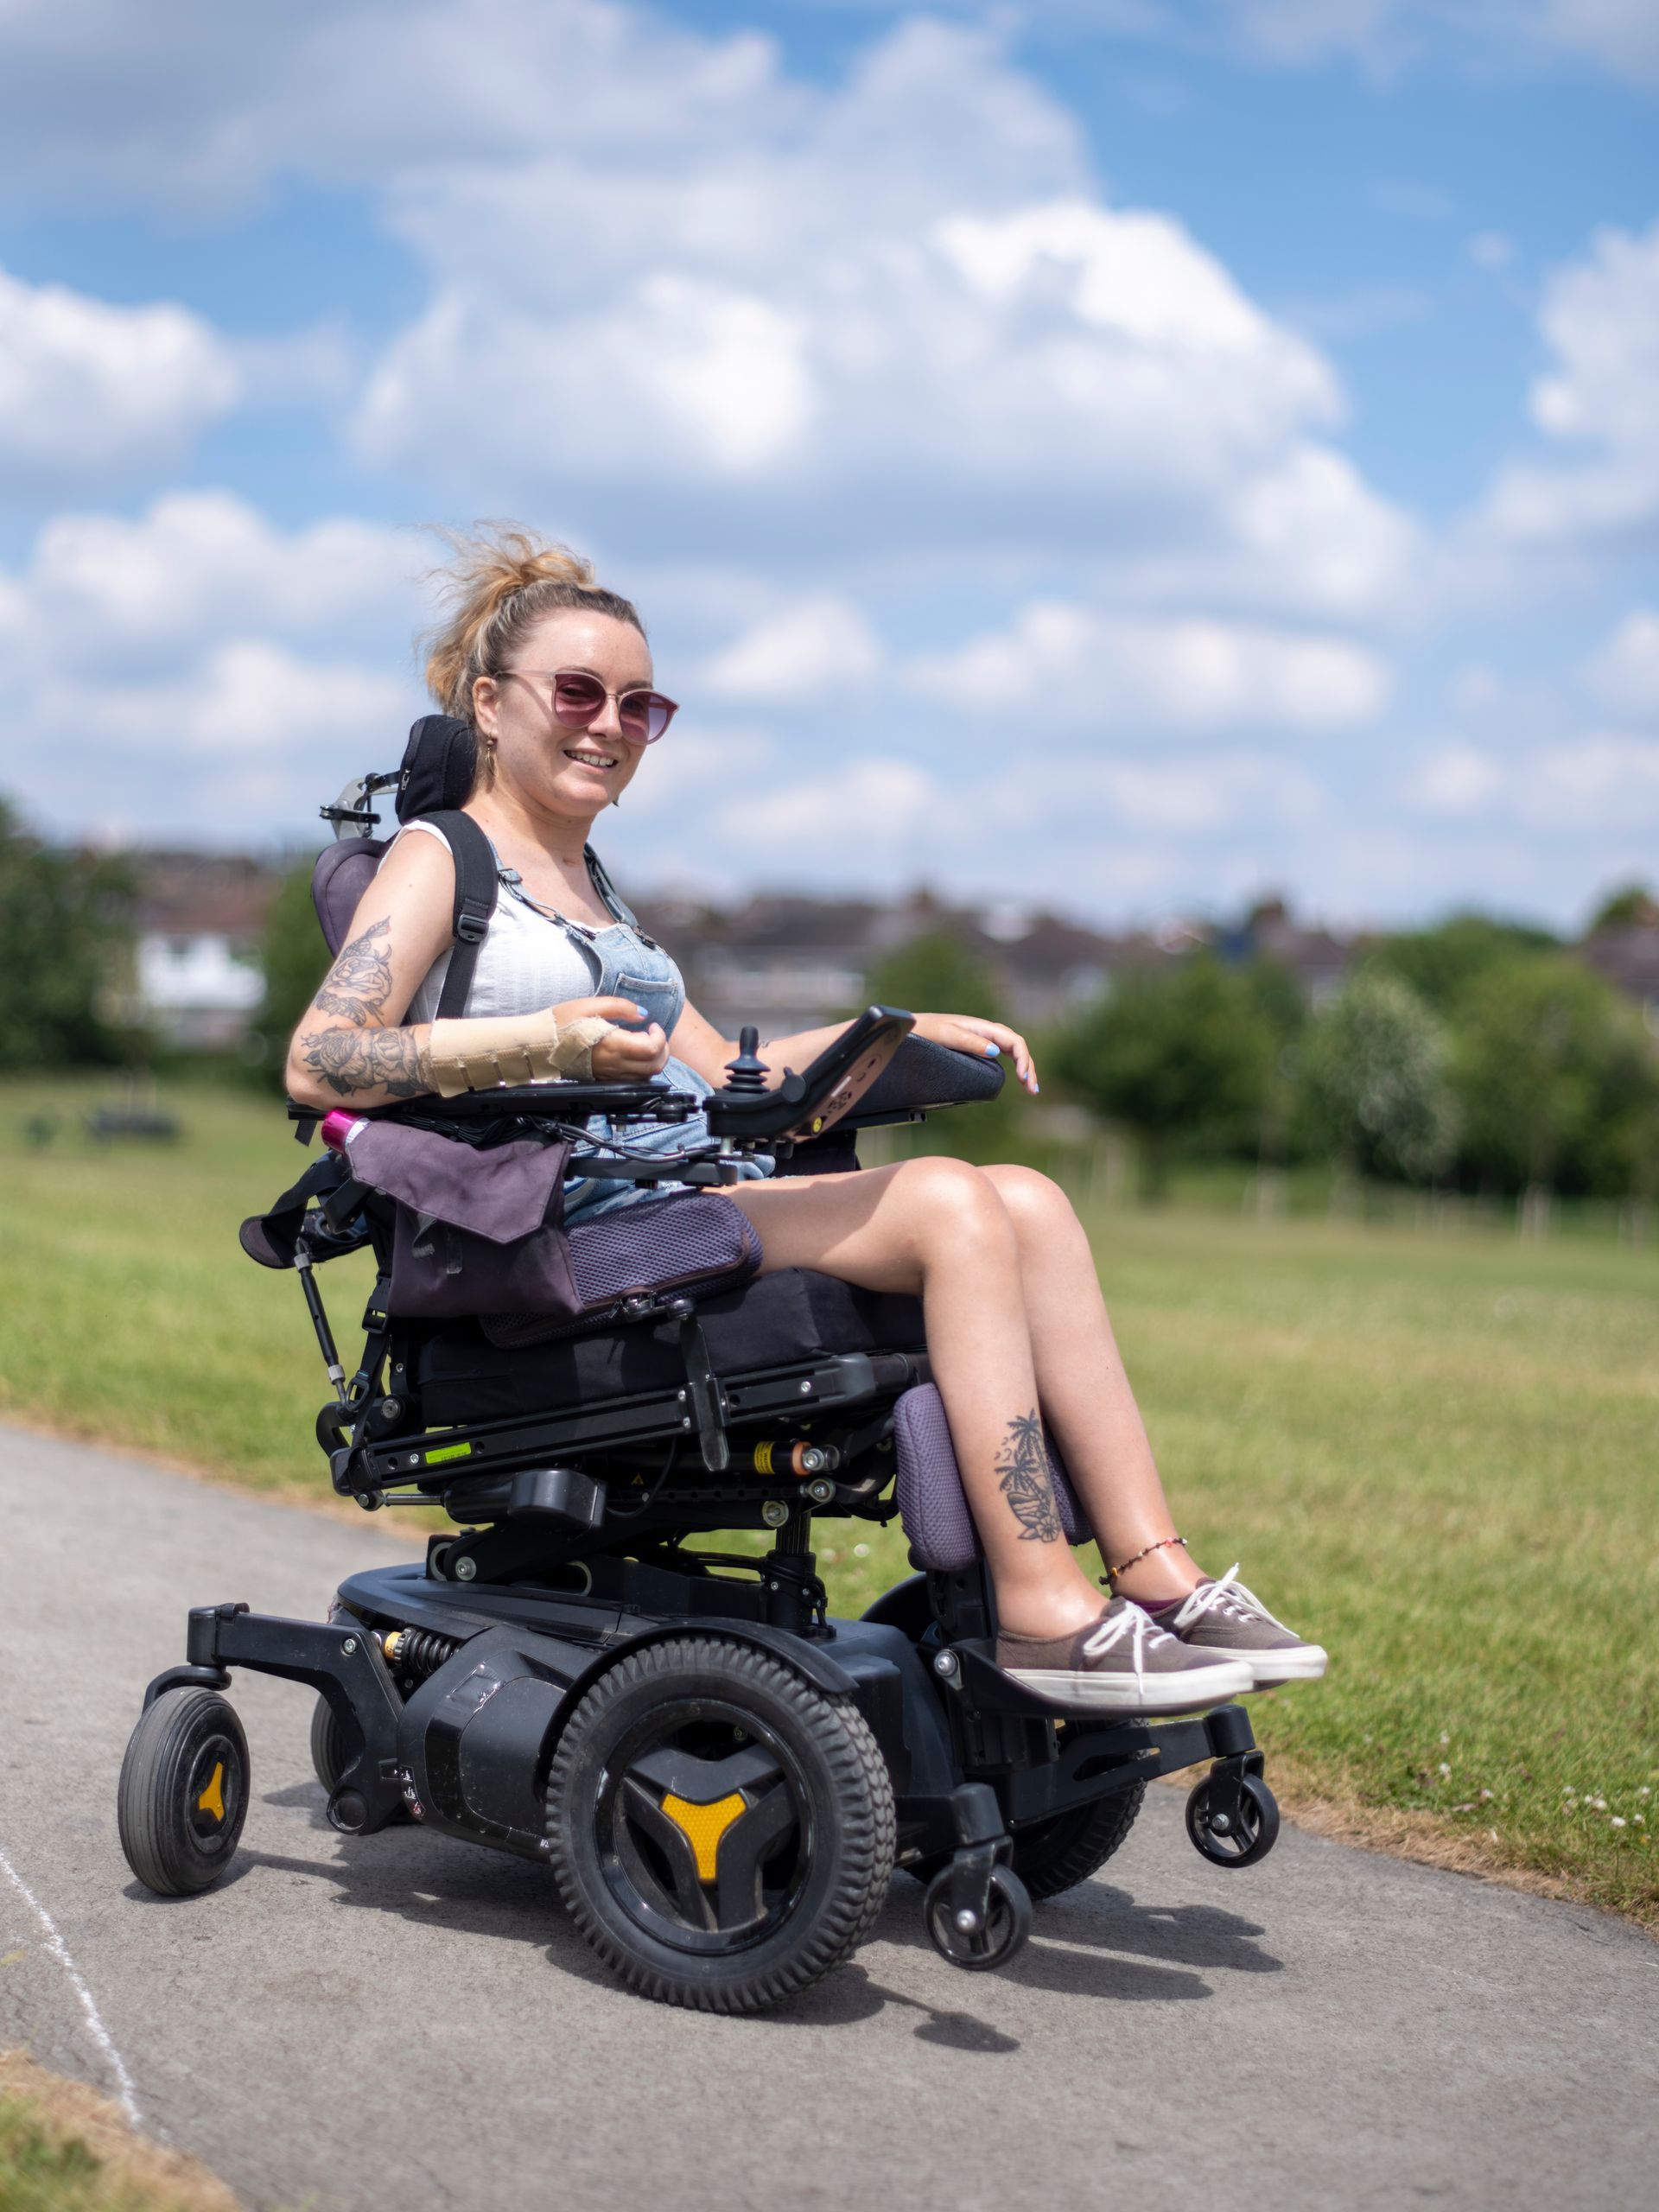 A smiling woman in a motorised wheelchair enjoys a bright and sunny day in the park.